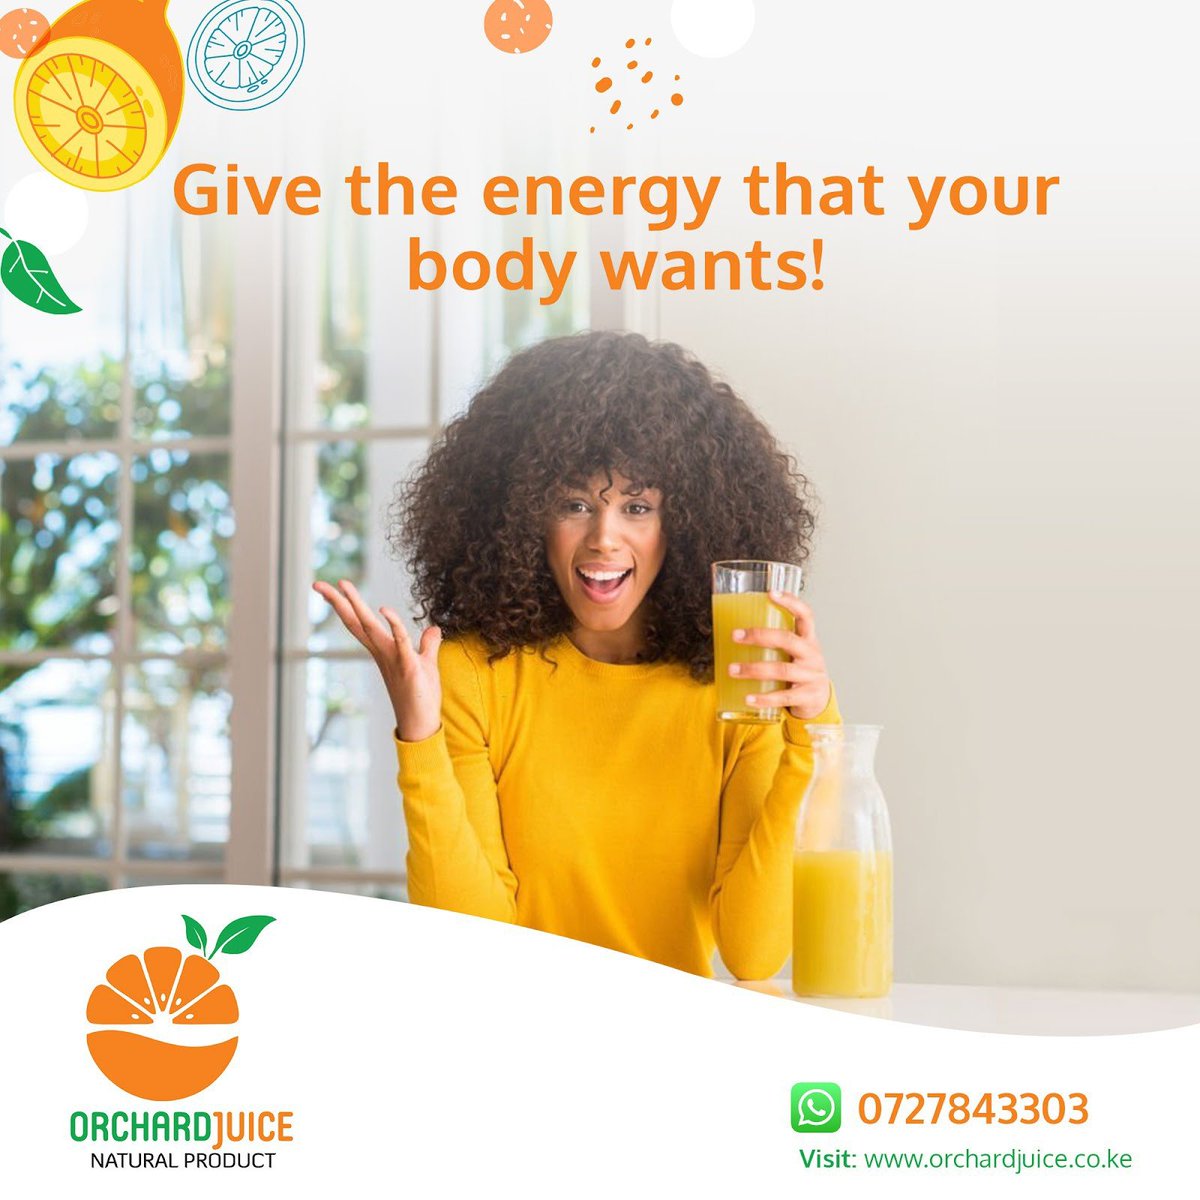 Give your body the energy it deserves, the natural way and let it do wonders. Try Orchard Juice Now!

#freshjuices🍌🍎🍊🍇 #fruitjuices #naturaljuice #juicesupplier #healthylifestyle